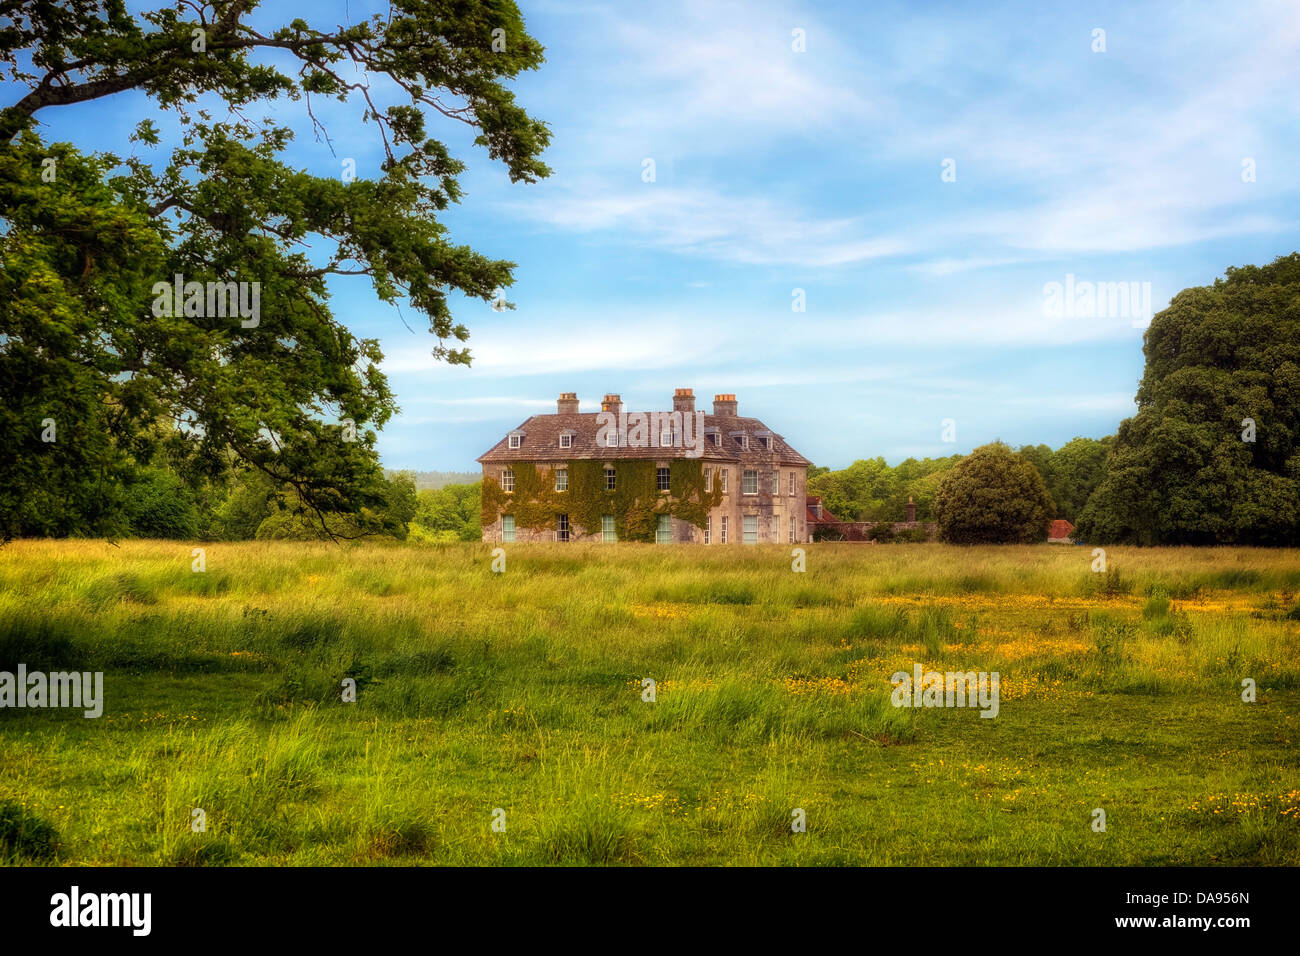 old mansion in the countryside of Dorset, United Kingdom Stock Photo